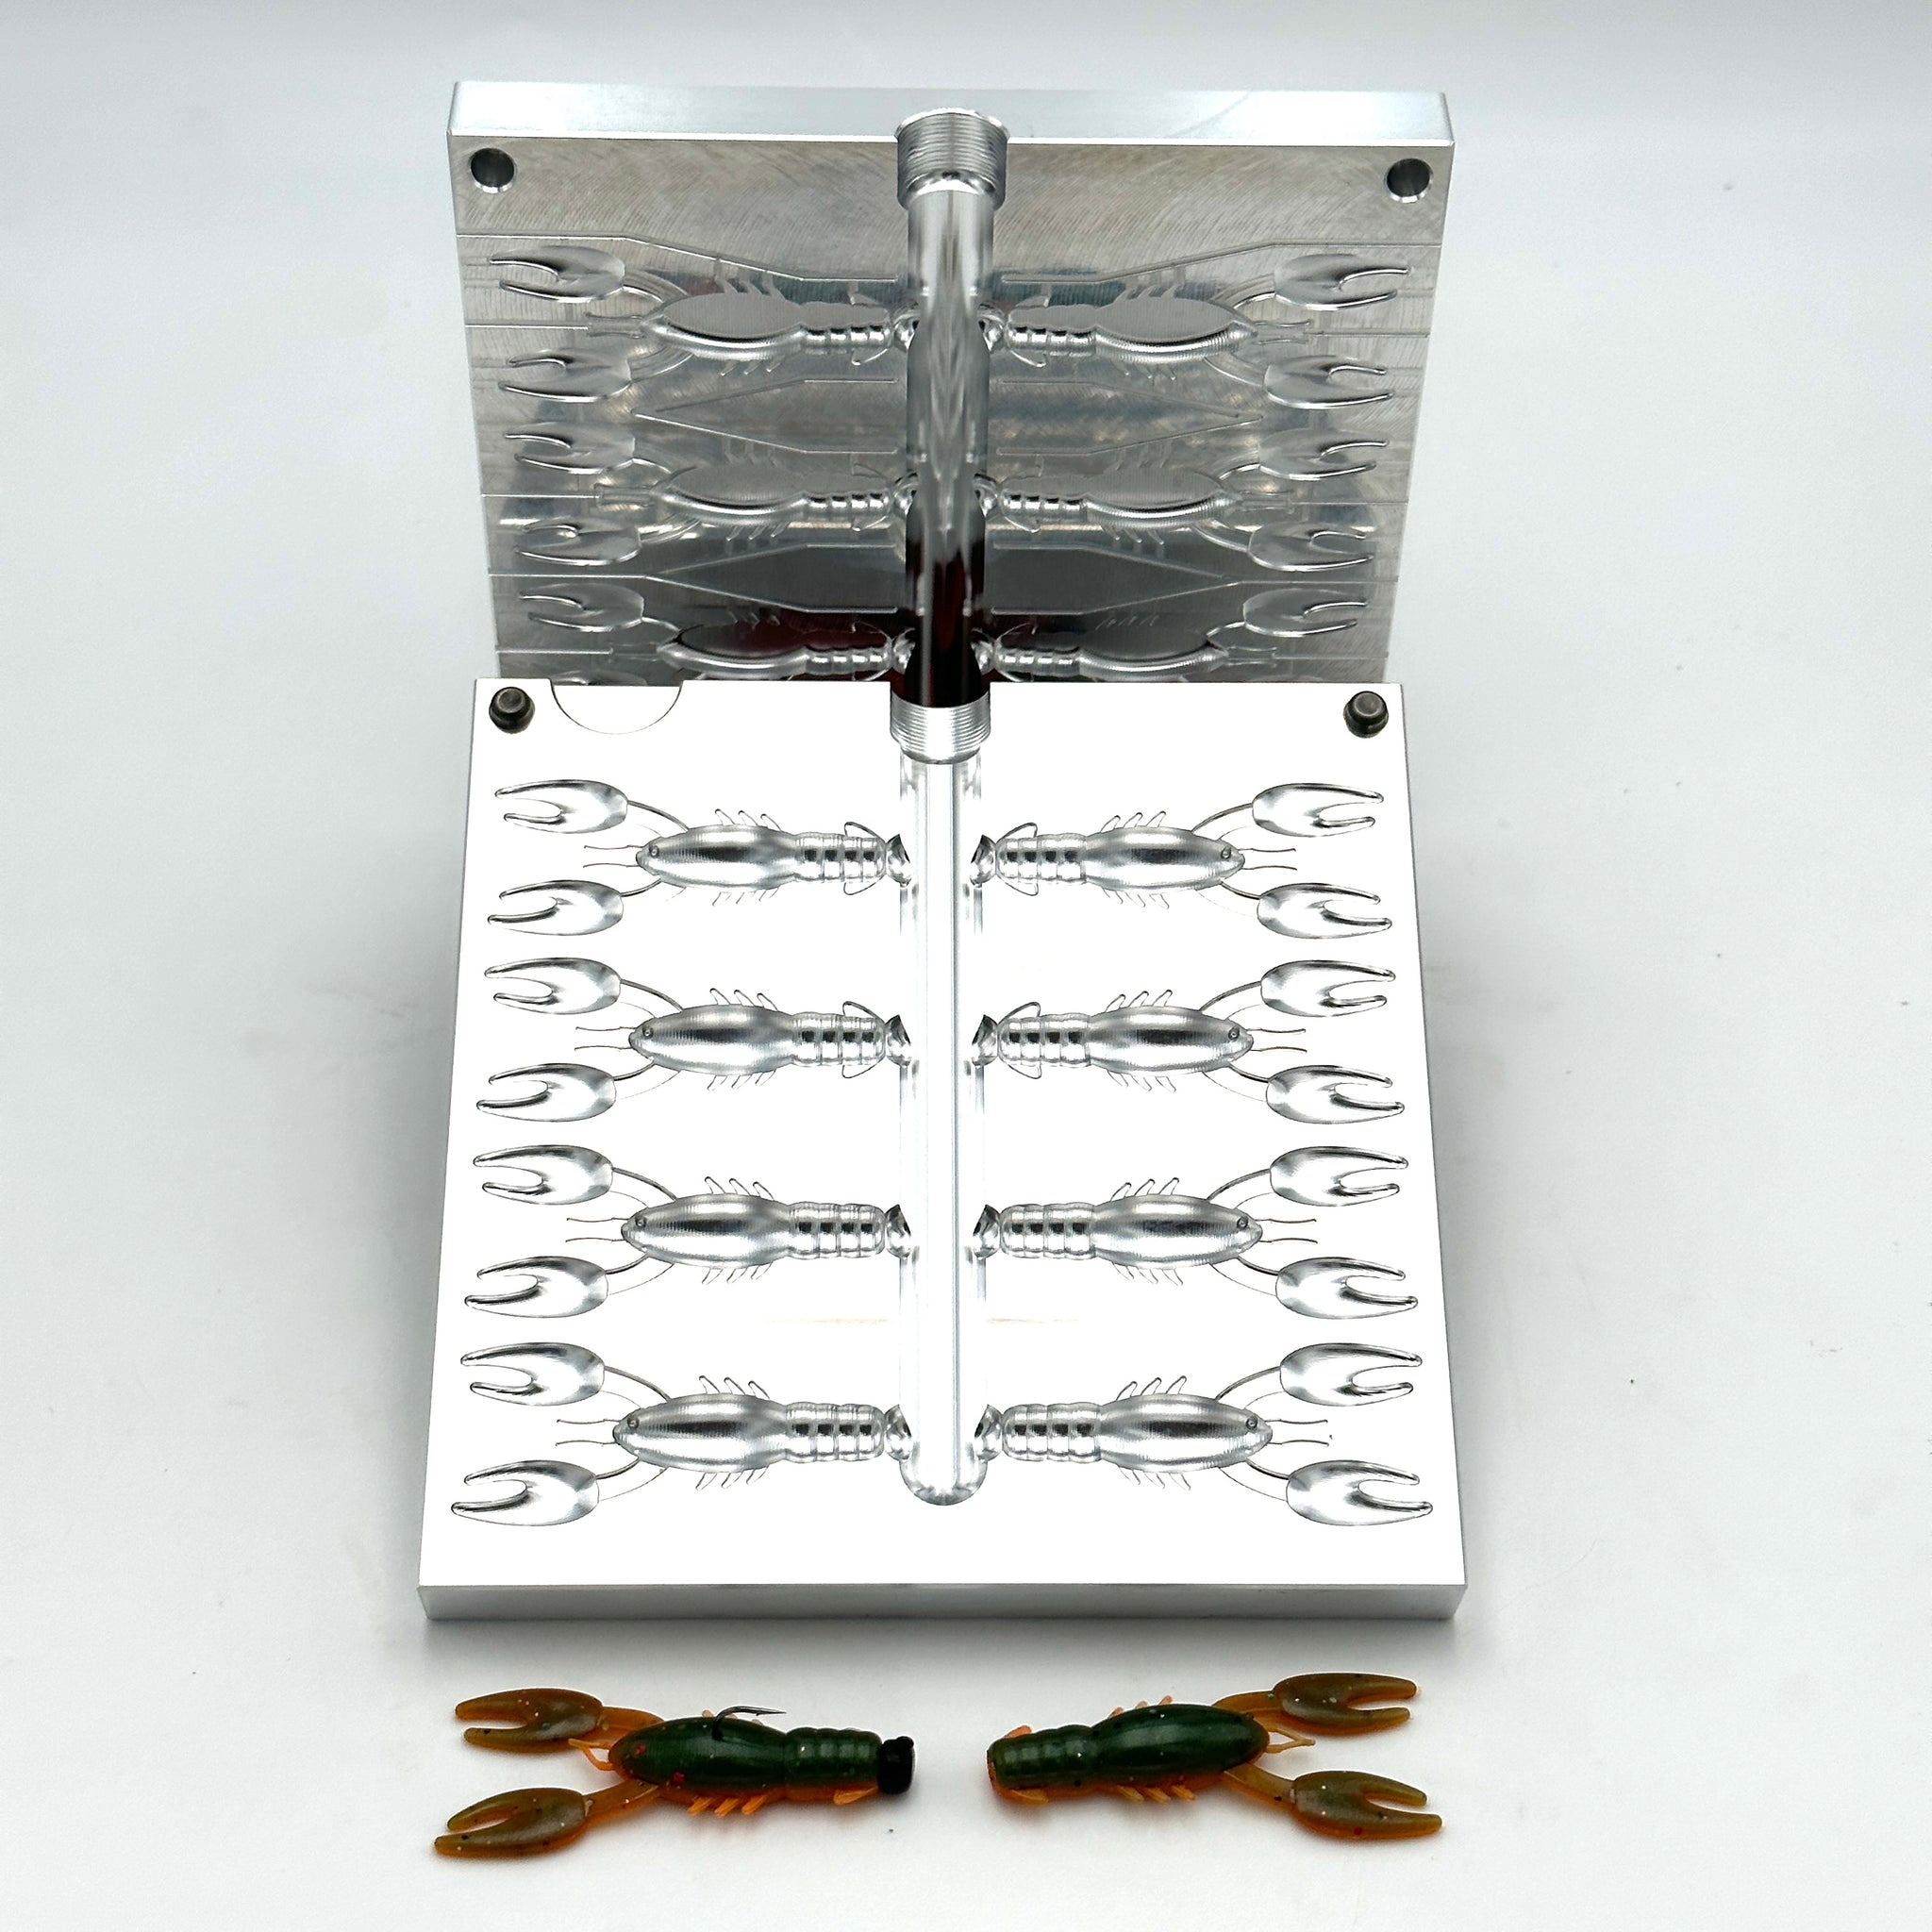 4 Inch Finesse Worm Hand Injection Mold – Epic Bait Molds